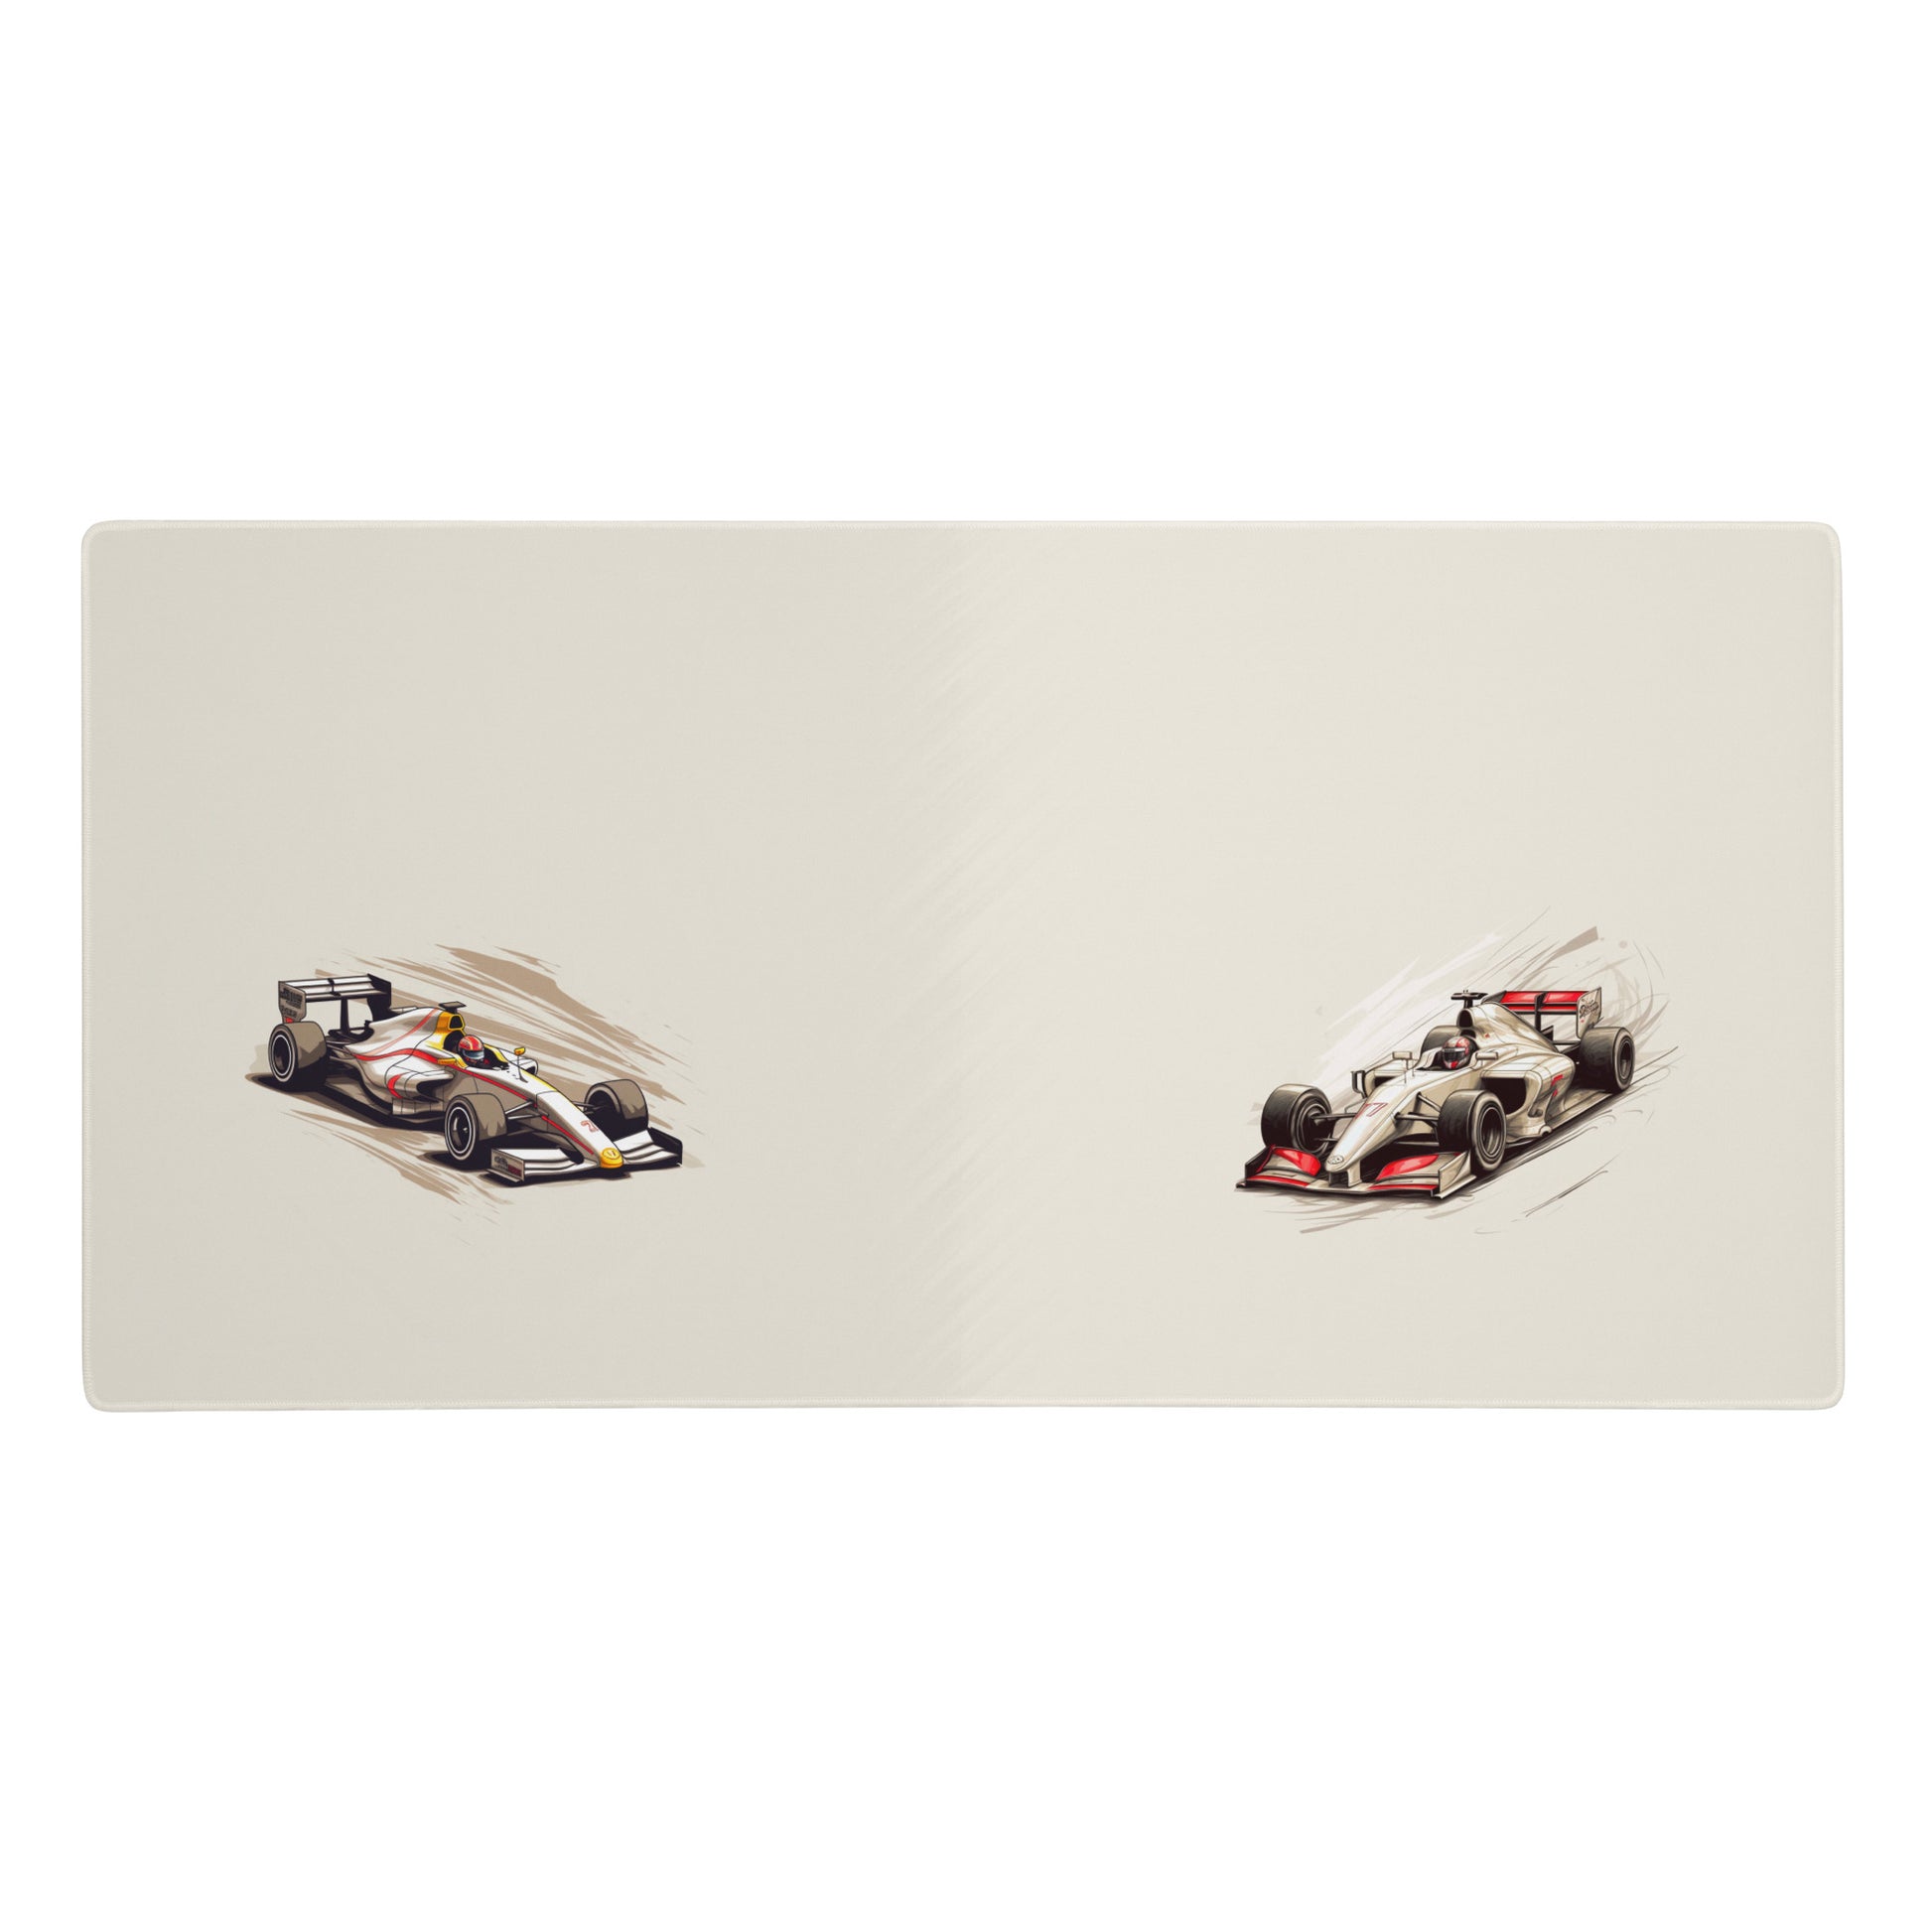 A 36" x 18" desk pad with two fast formula one cars on the sides. Beige in color.